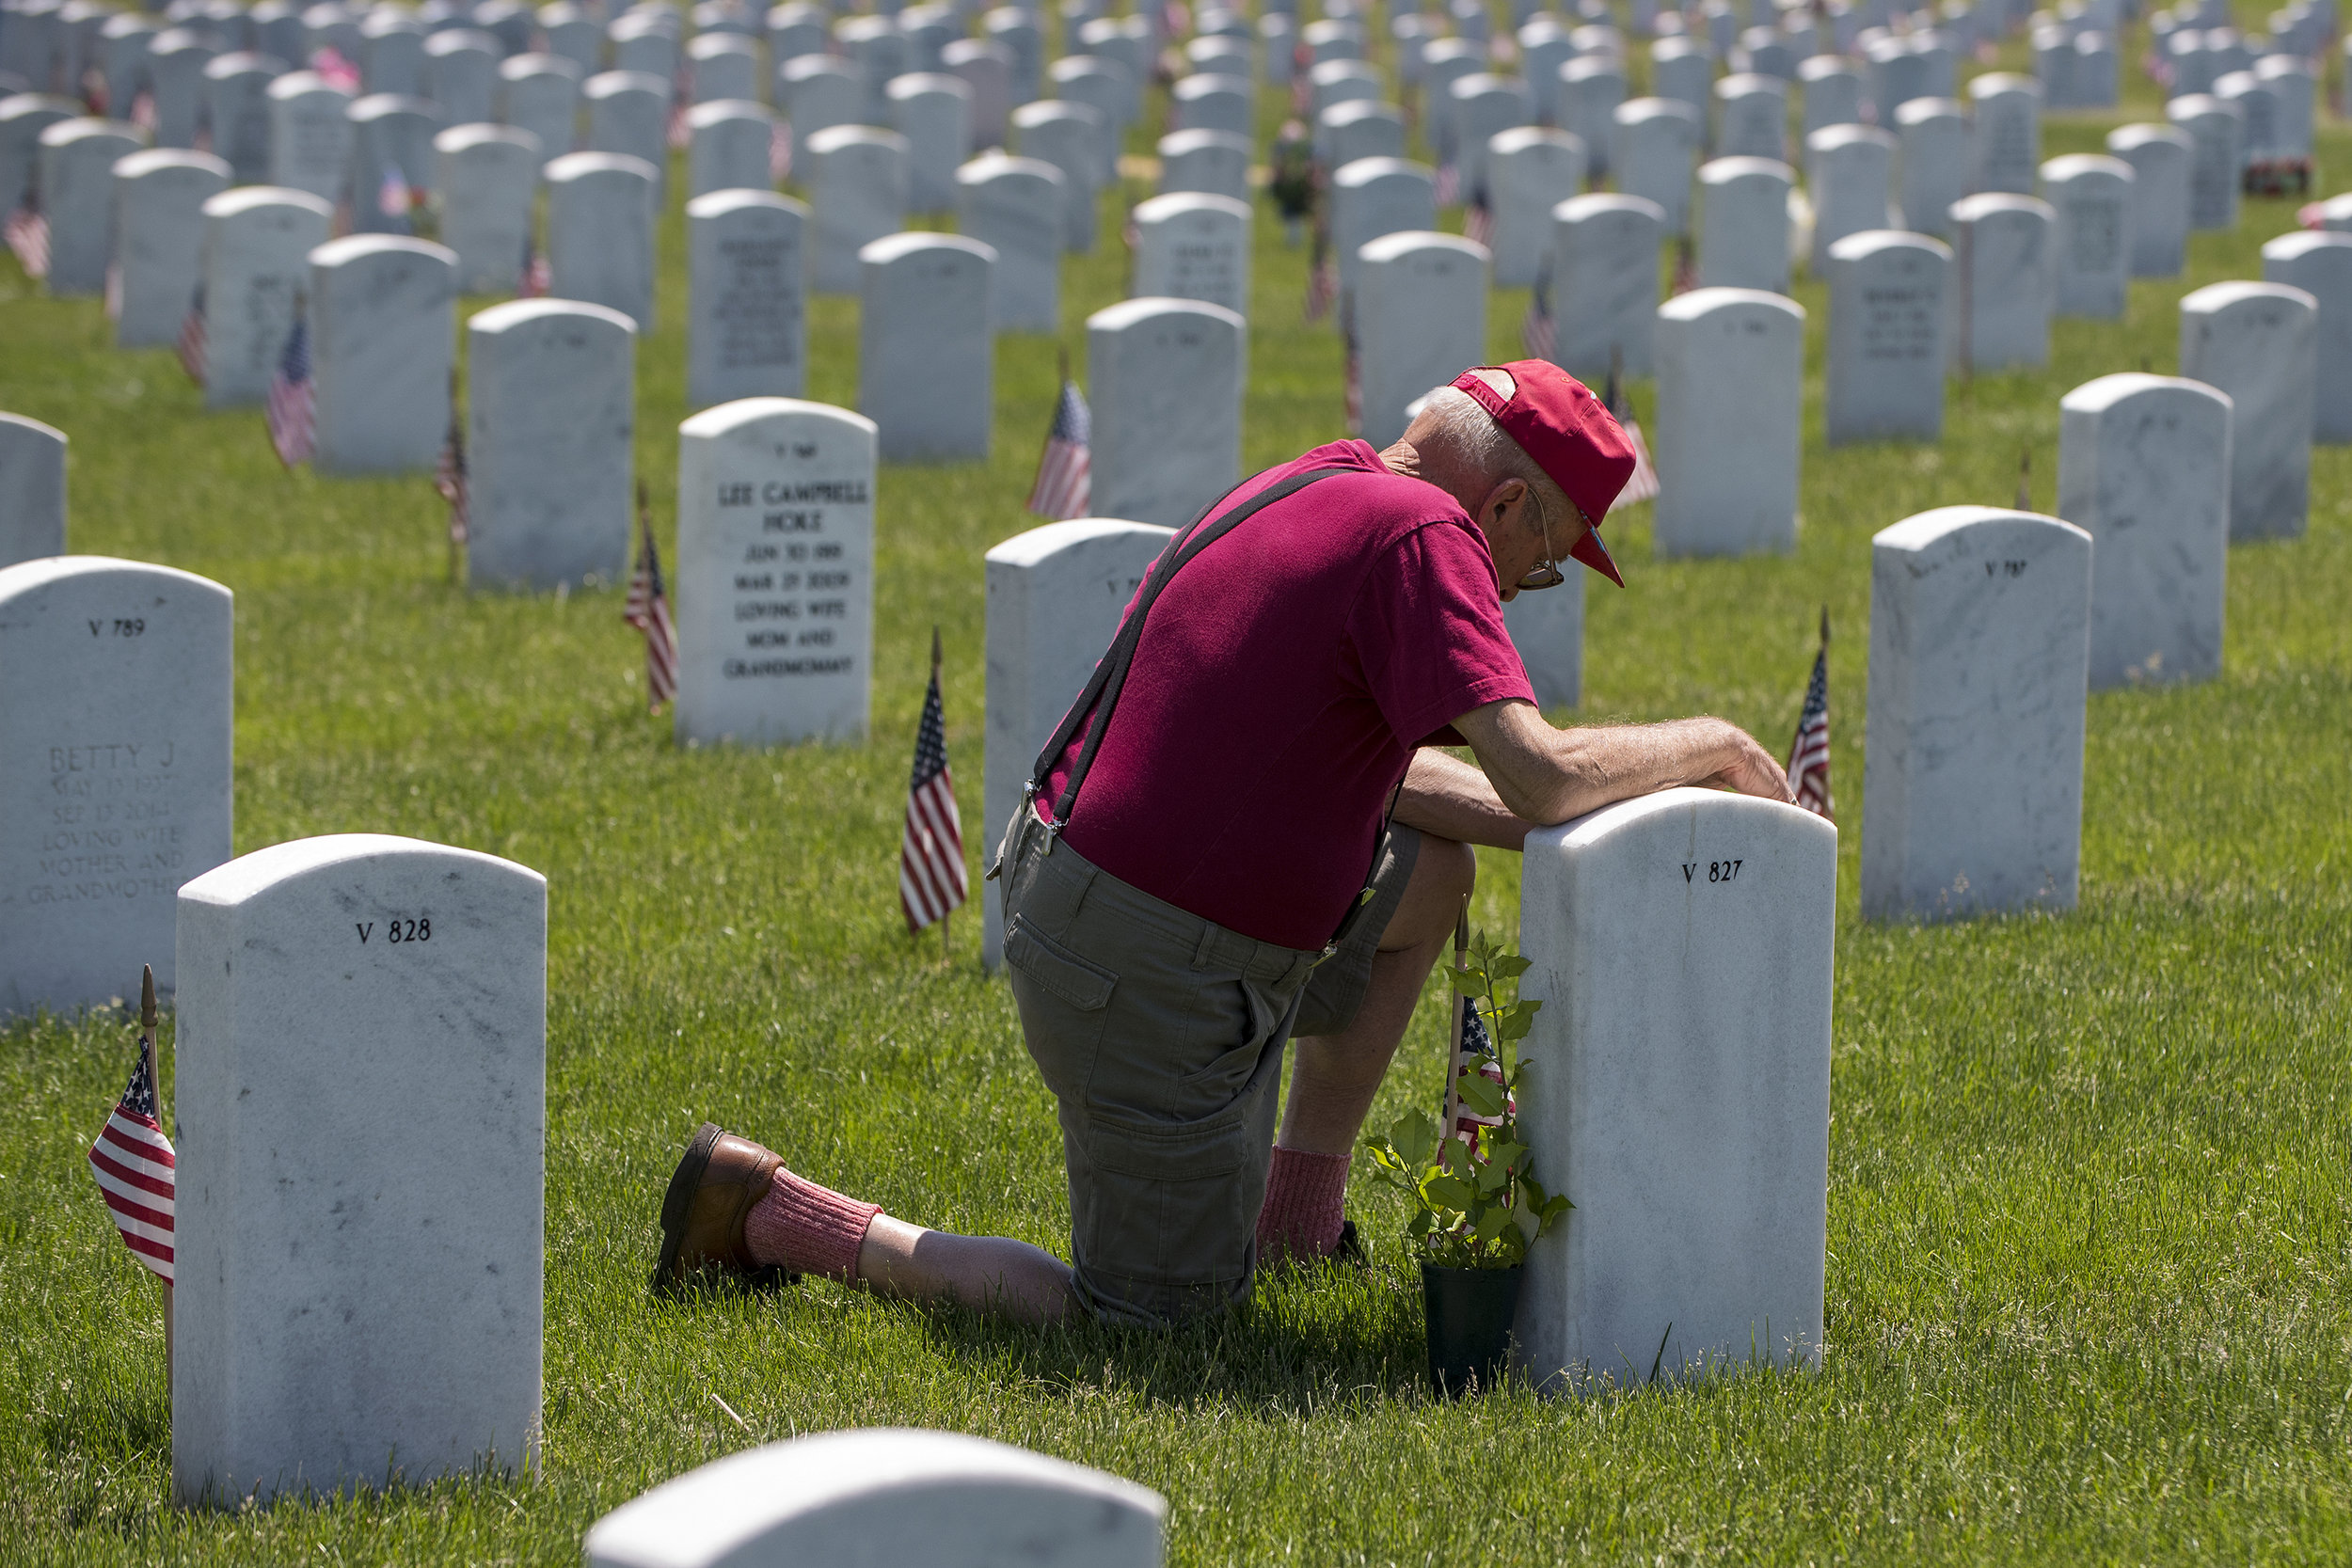  "You come to see your loved ones," Army veteran Nicholas Fotiadis of East Moline said after kneeling at the gravestone of his wife Mary Ann Fotiadis. "I think what [Memorial Day] is supposed to stand for is the important thing. … If you served, I th